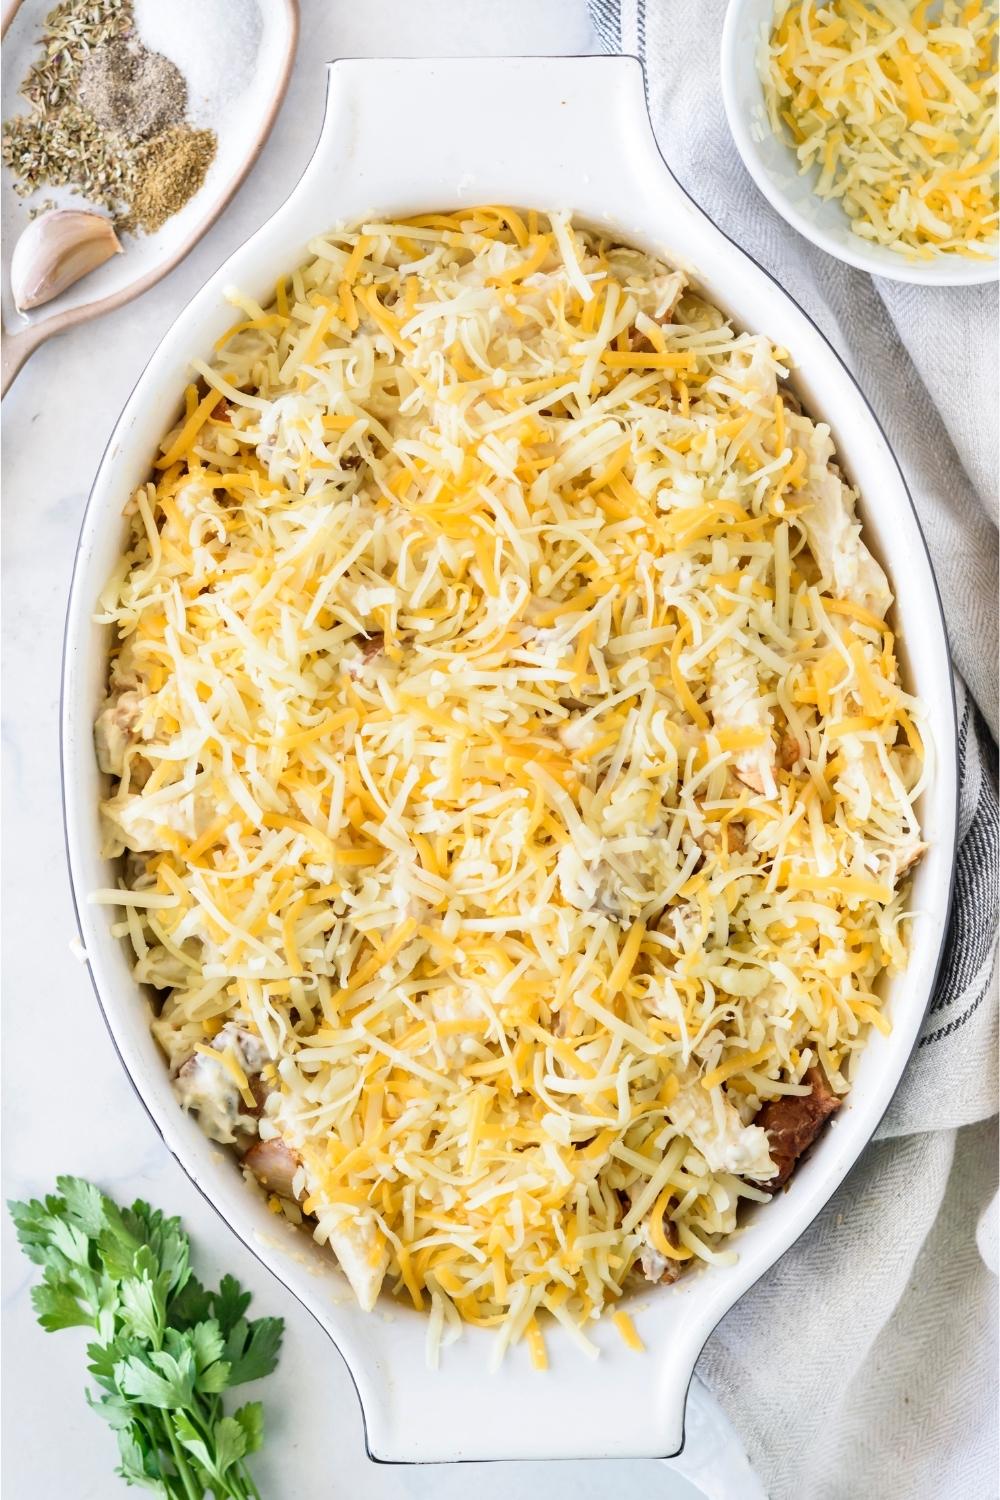 A casserole dish with unbaked chicken alfredo casserole topped with shredded cheese.